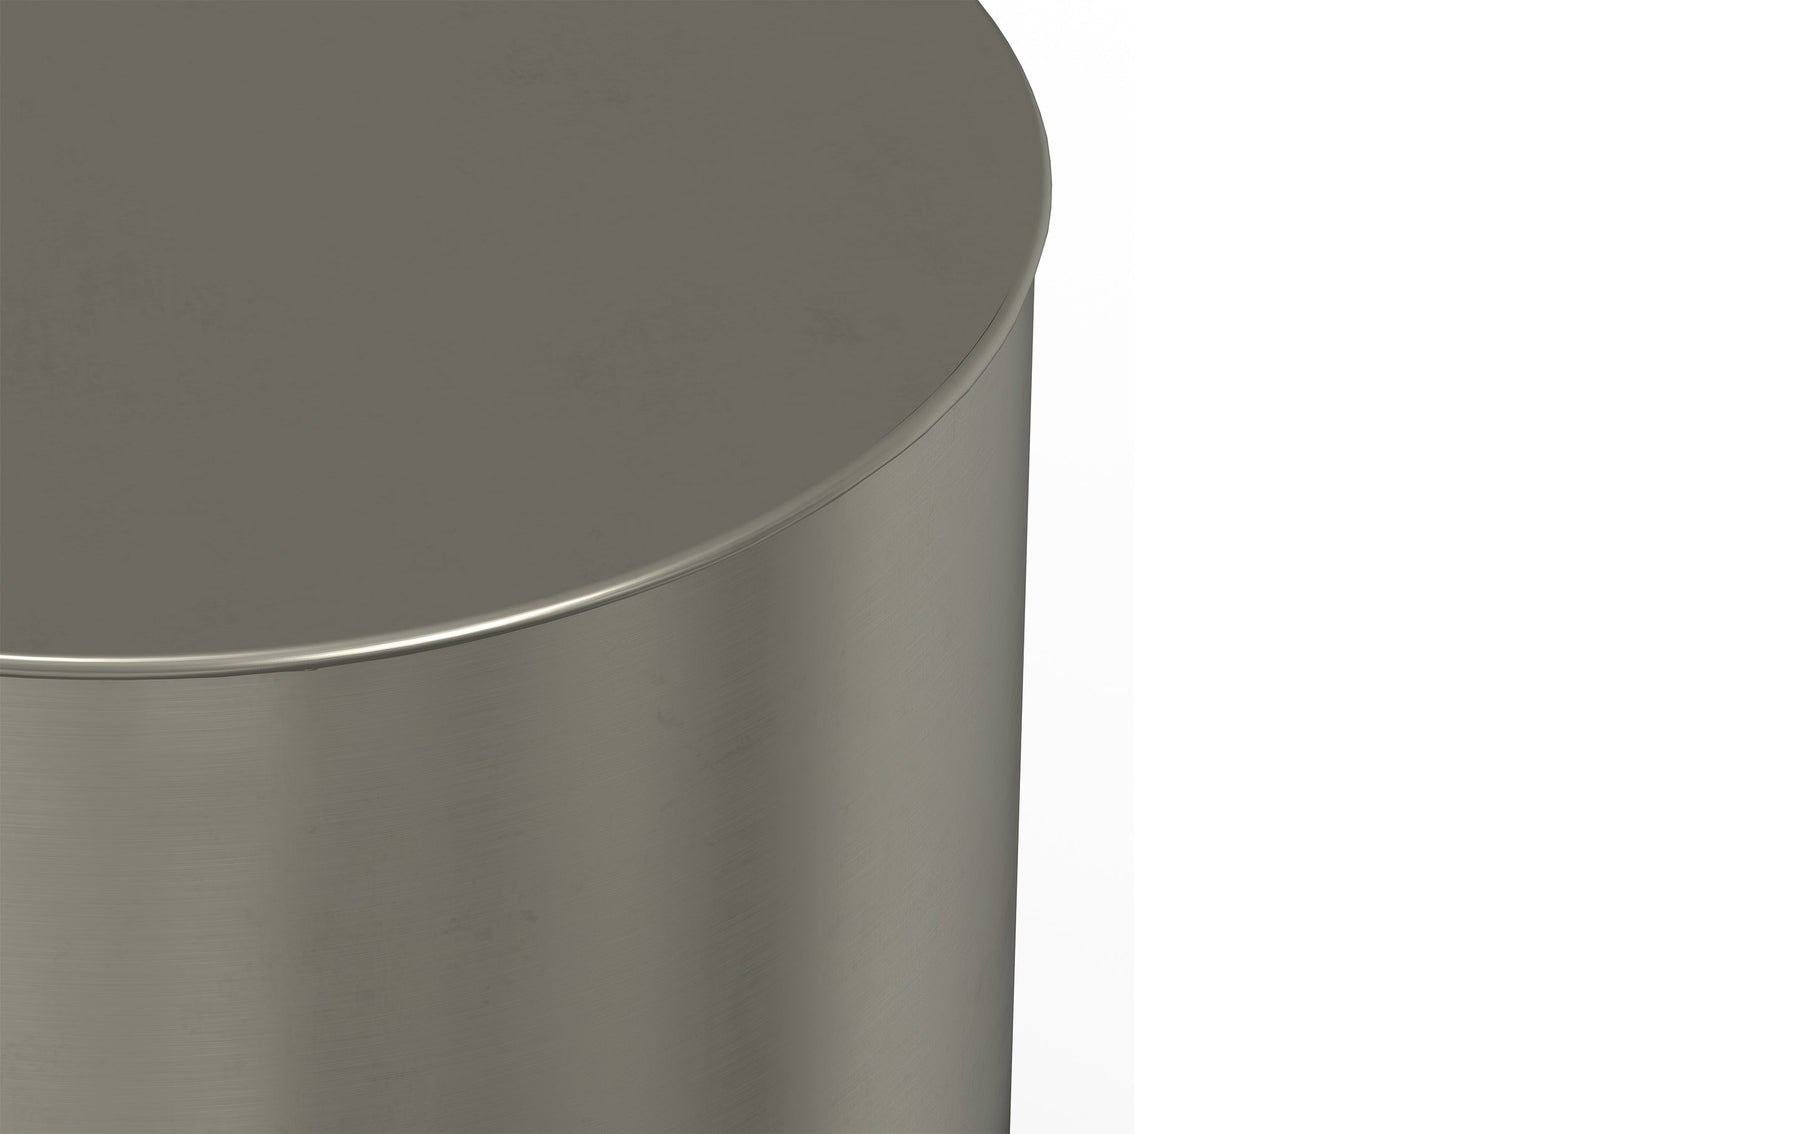 Ombre Black and Silver | Curtis Metal Cylinder Accent Table